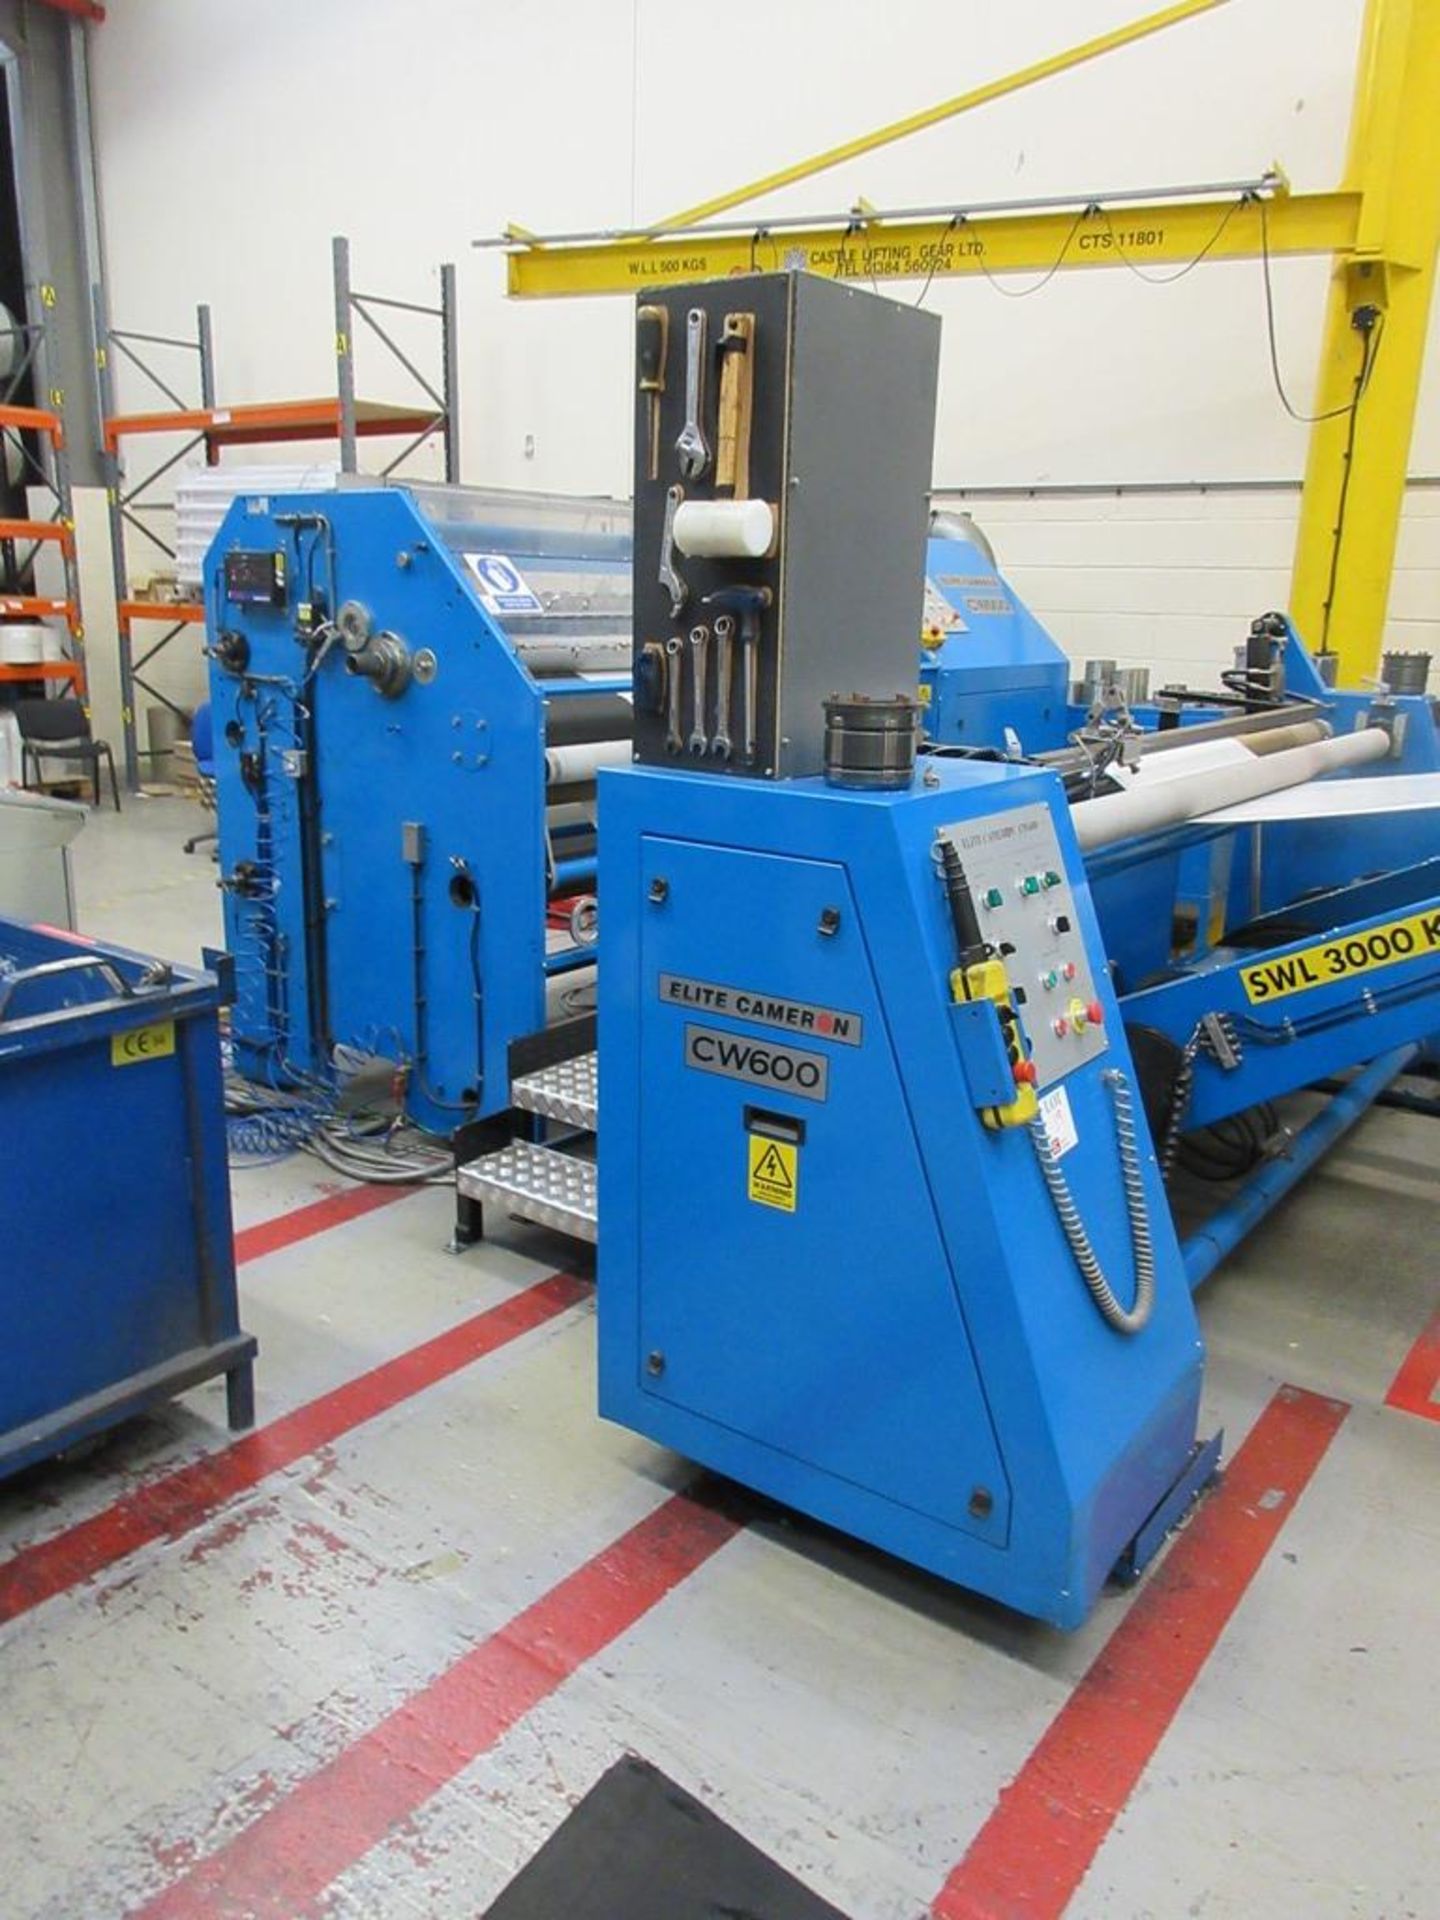 Elite Cameron CW600 automatic slitting machine, s/n: MO2030 (2001), capacity 3000kg with - - Image 10 of 16